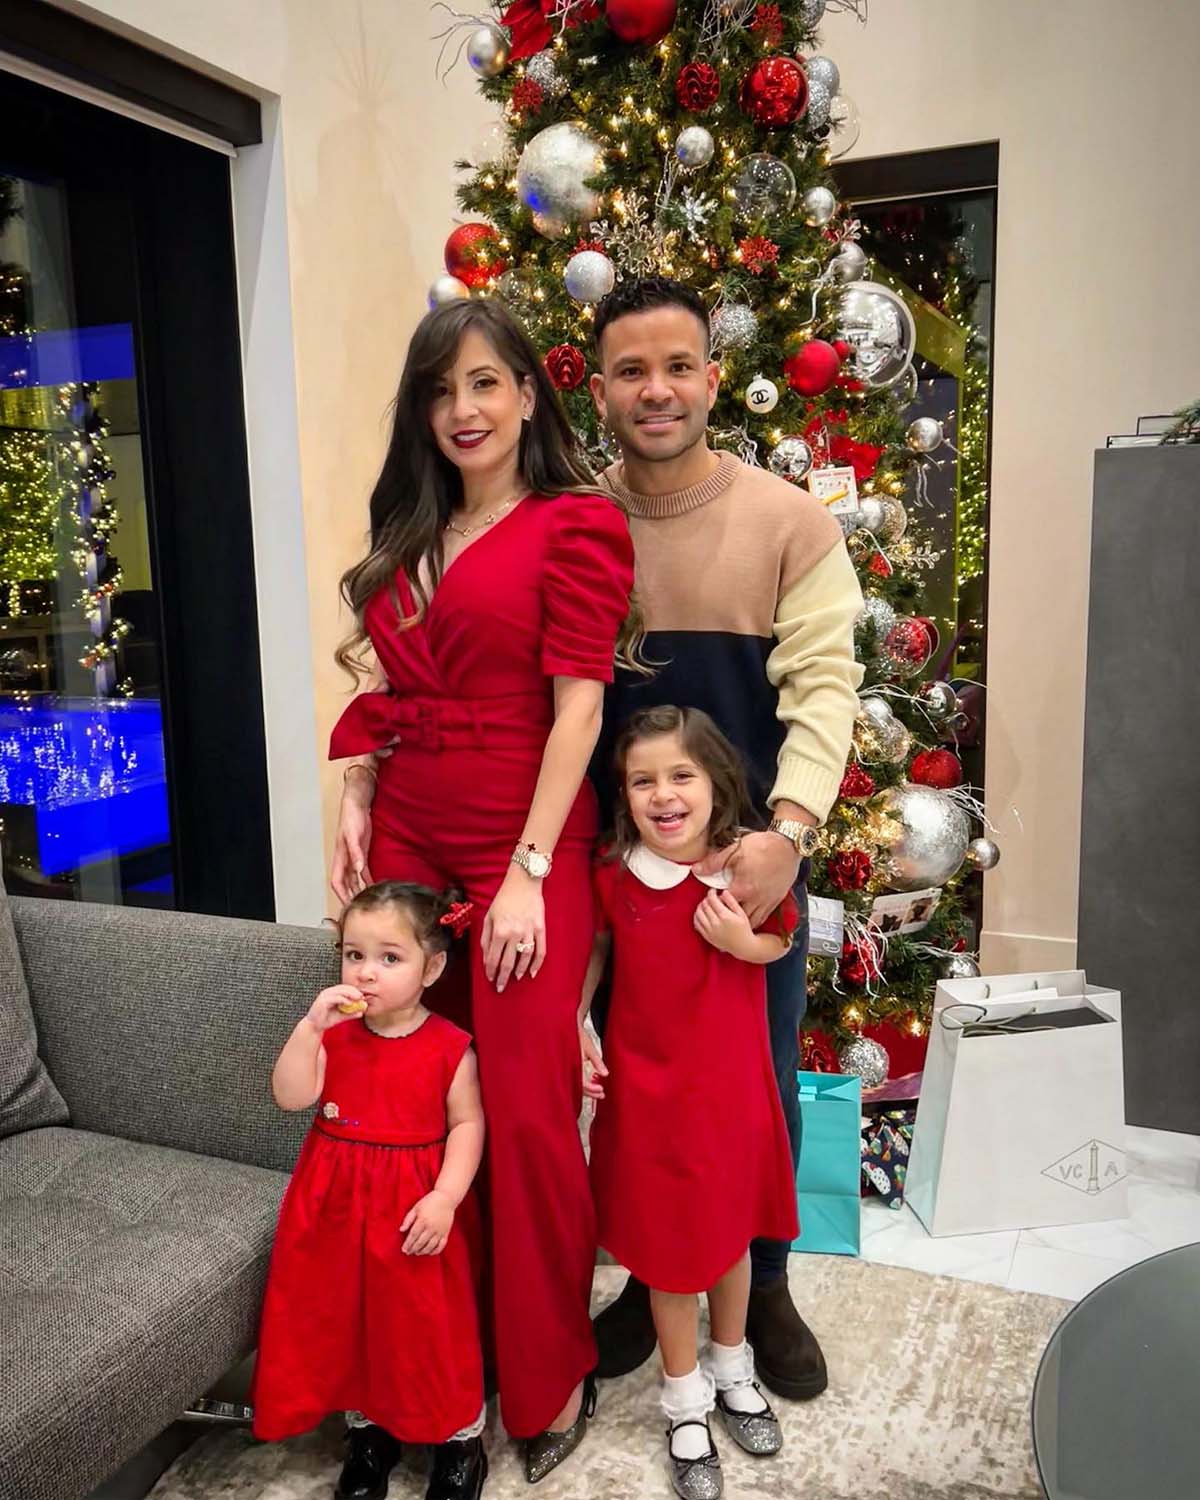 Jose Altuve's Wife Nina Made Her Instagram Public & It Shows A Sweet Side  To The MLB Star